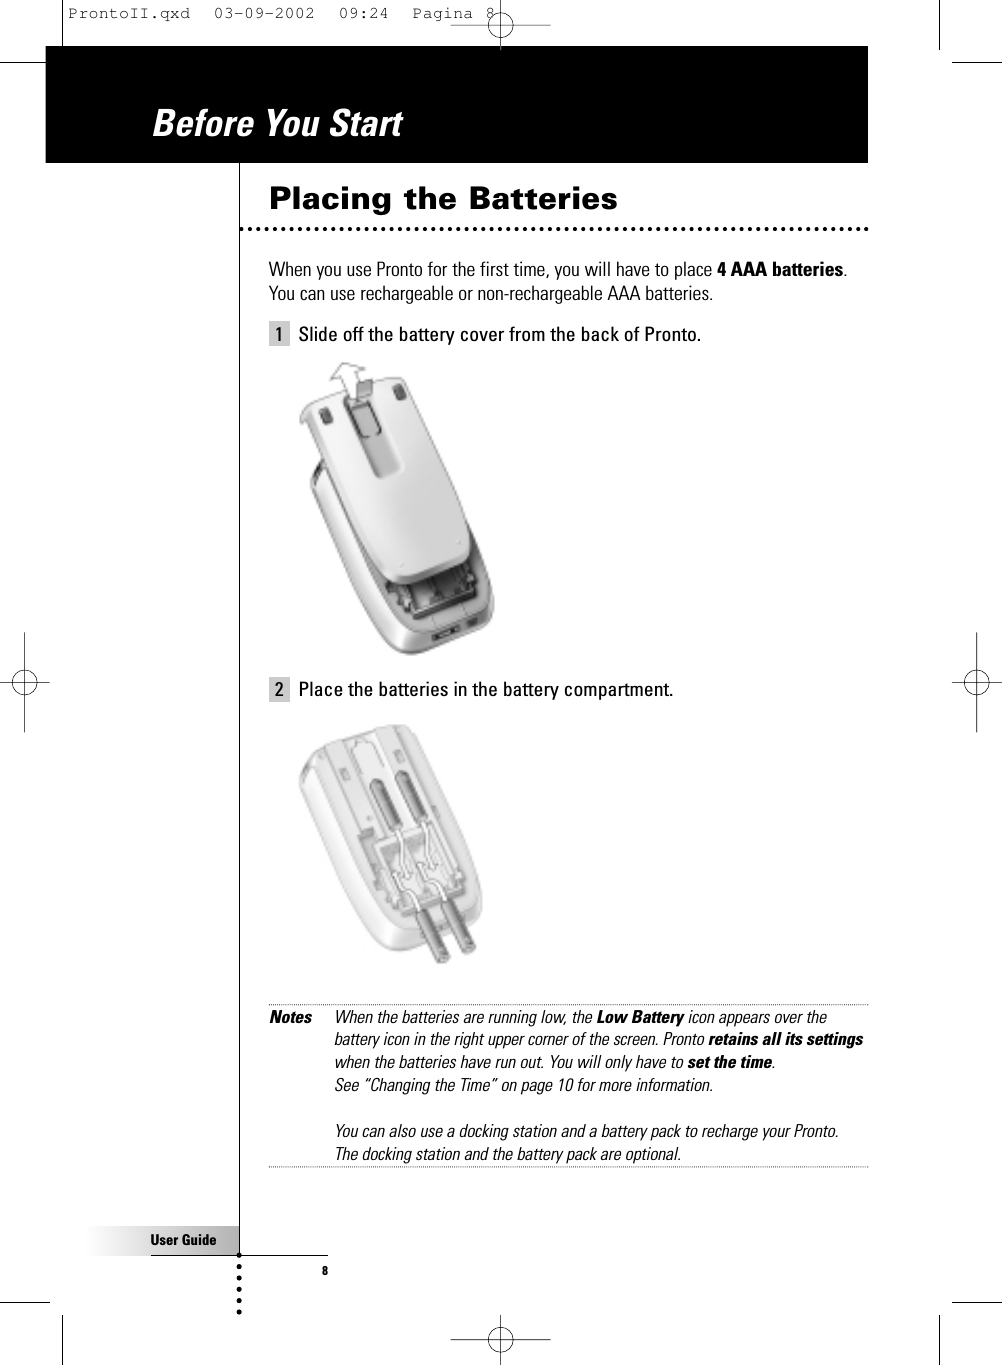 User Guide8Placing the BatteriesWhen you use Pronto for the first time, you will have to place 4 AAA batteries. You can use rechargeable or non-rechargeable AAA batteries. 1 Slide off the battery cover from the back of Pronto.2 Place the batteries in the battery compartment.Notes When the batteries are running low, the Low Battery icon appears over thebattery icon in the right upper corner of the screen. Pronto retains all its settingswhen the batteries have run out. You will only have to set the time. See “Changing the Time” on page 10 for more information.You can also use a docking station and a battery pack to recharge your Pronto. The docking station and the battery pack are optional.Before You StartProntoII.qxd  03-09-2002  09:24  Pagina 8